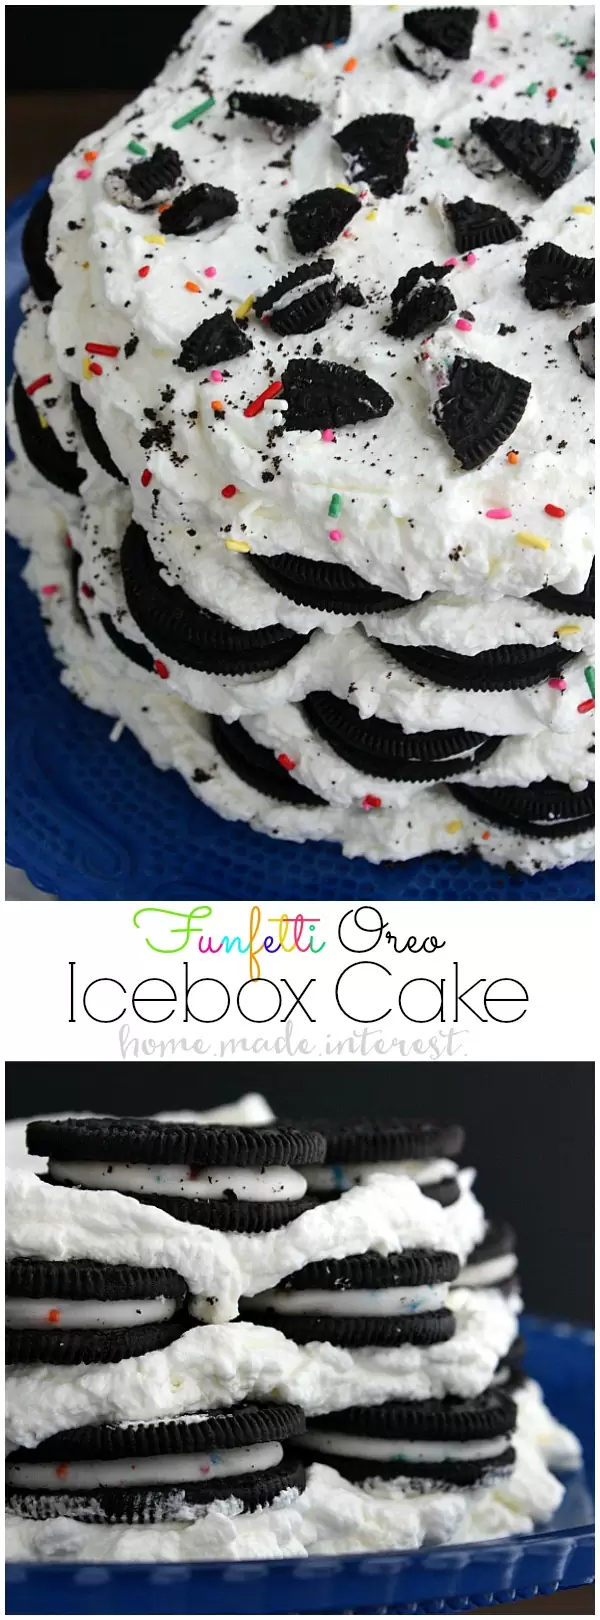 This Funfetti Oreo Icebox Cake is a no bake cake made with layers of whipped cream and Oreos. It is an easy cake recipe that everyone will love! I can’t get enough Oreos so this is my favorite birthday cake recipe. We even have a quick and easy tutorial on how to make a cake stand from thrift store items. It is such a simple way to make a personalized birthday gift for a friend complete with an Oreo Icebox Cake on top!!